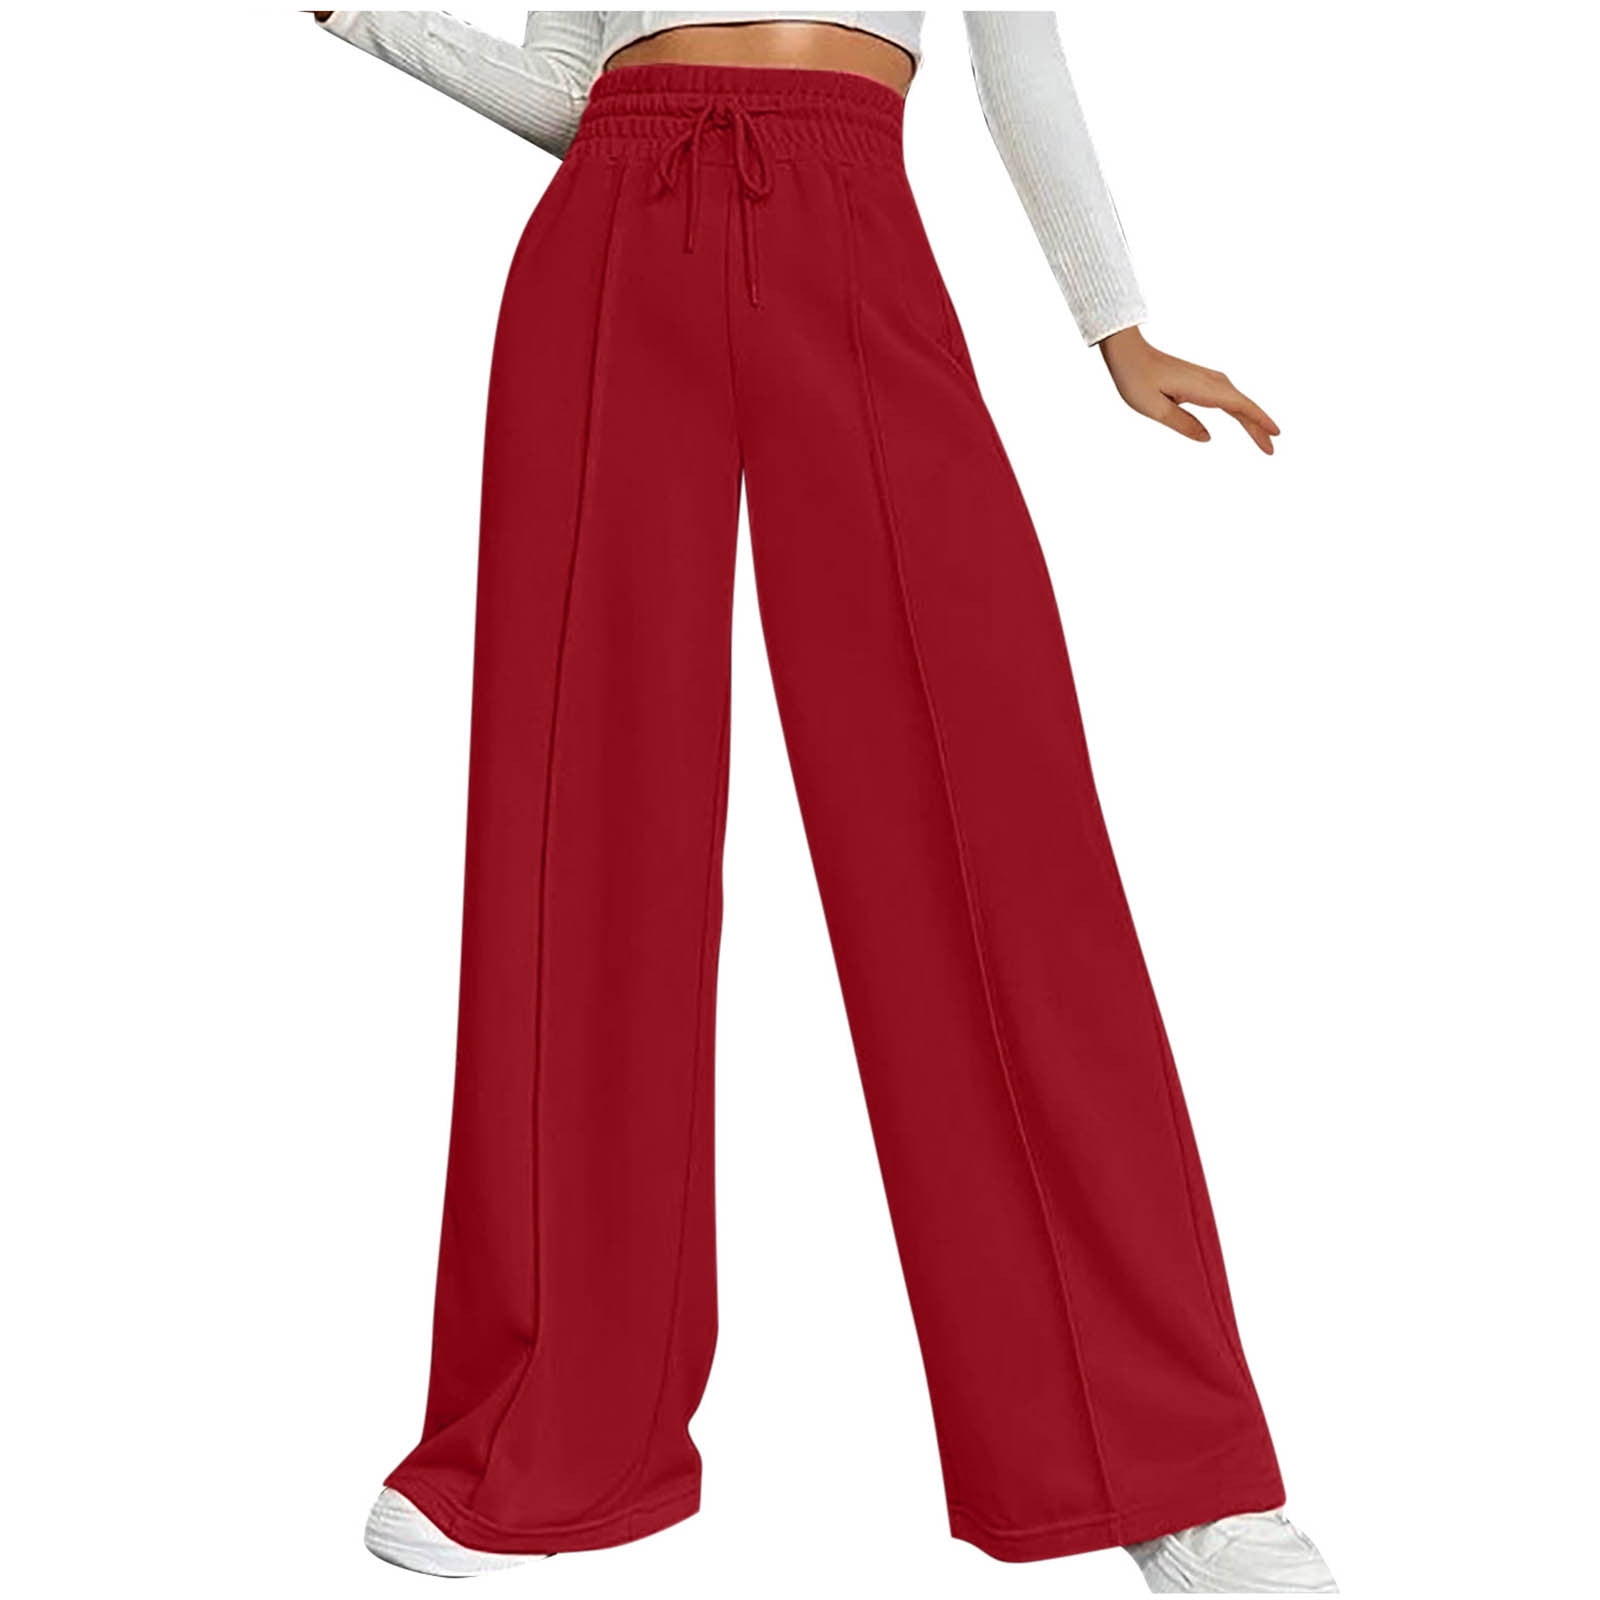 XFLWAM Women's High Waist Wide Leg Pants Casual Lightweight Elastic  Drawstring Palazzo Trousers with Pocket Red XL